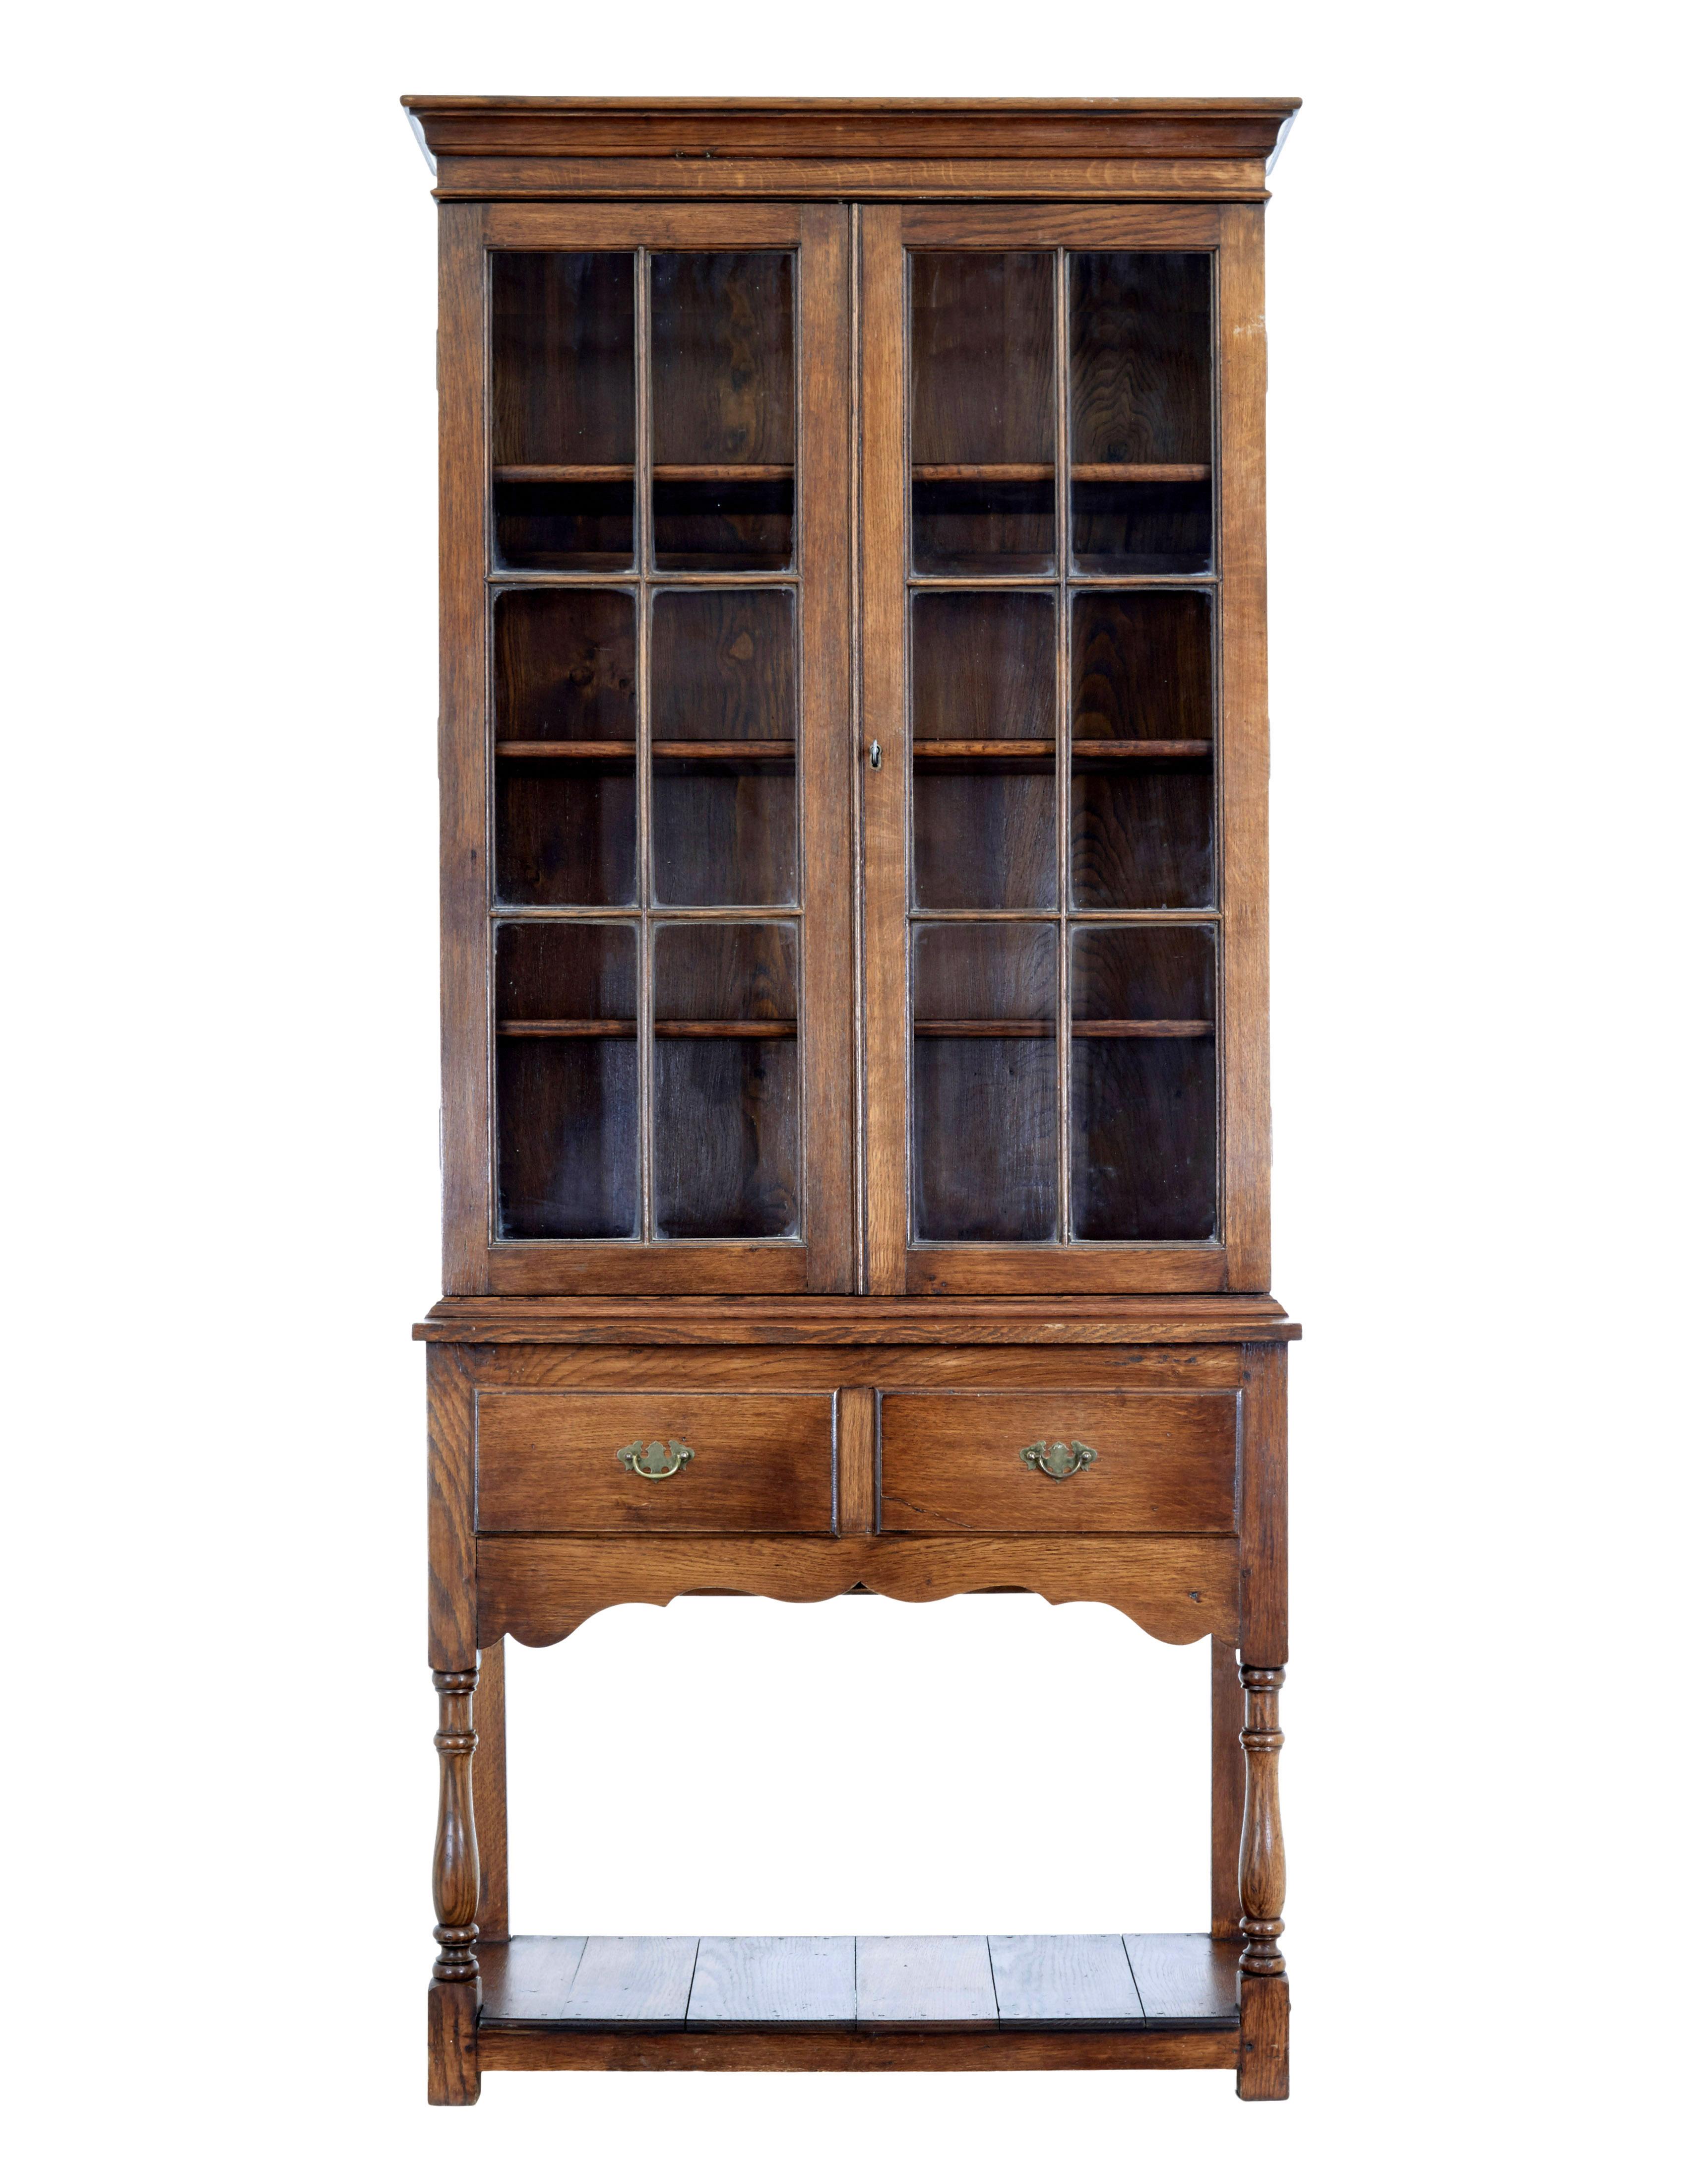 Oak and glazed cabinet on base circa 1980.

Good quality 1 off piece of furniture, comprising of 2 sections.

Top section with cornice, below which are a pair of glazed double doors that open to reveal a interior of 3 shelves. Bottom section